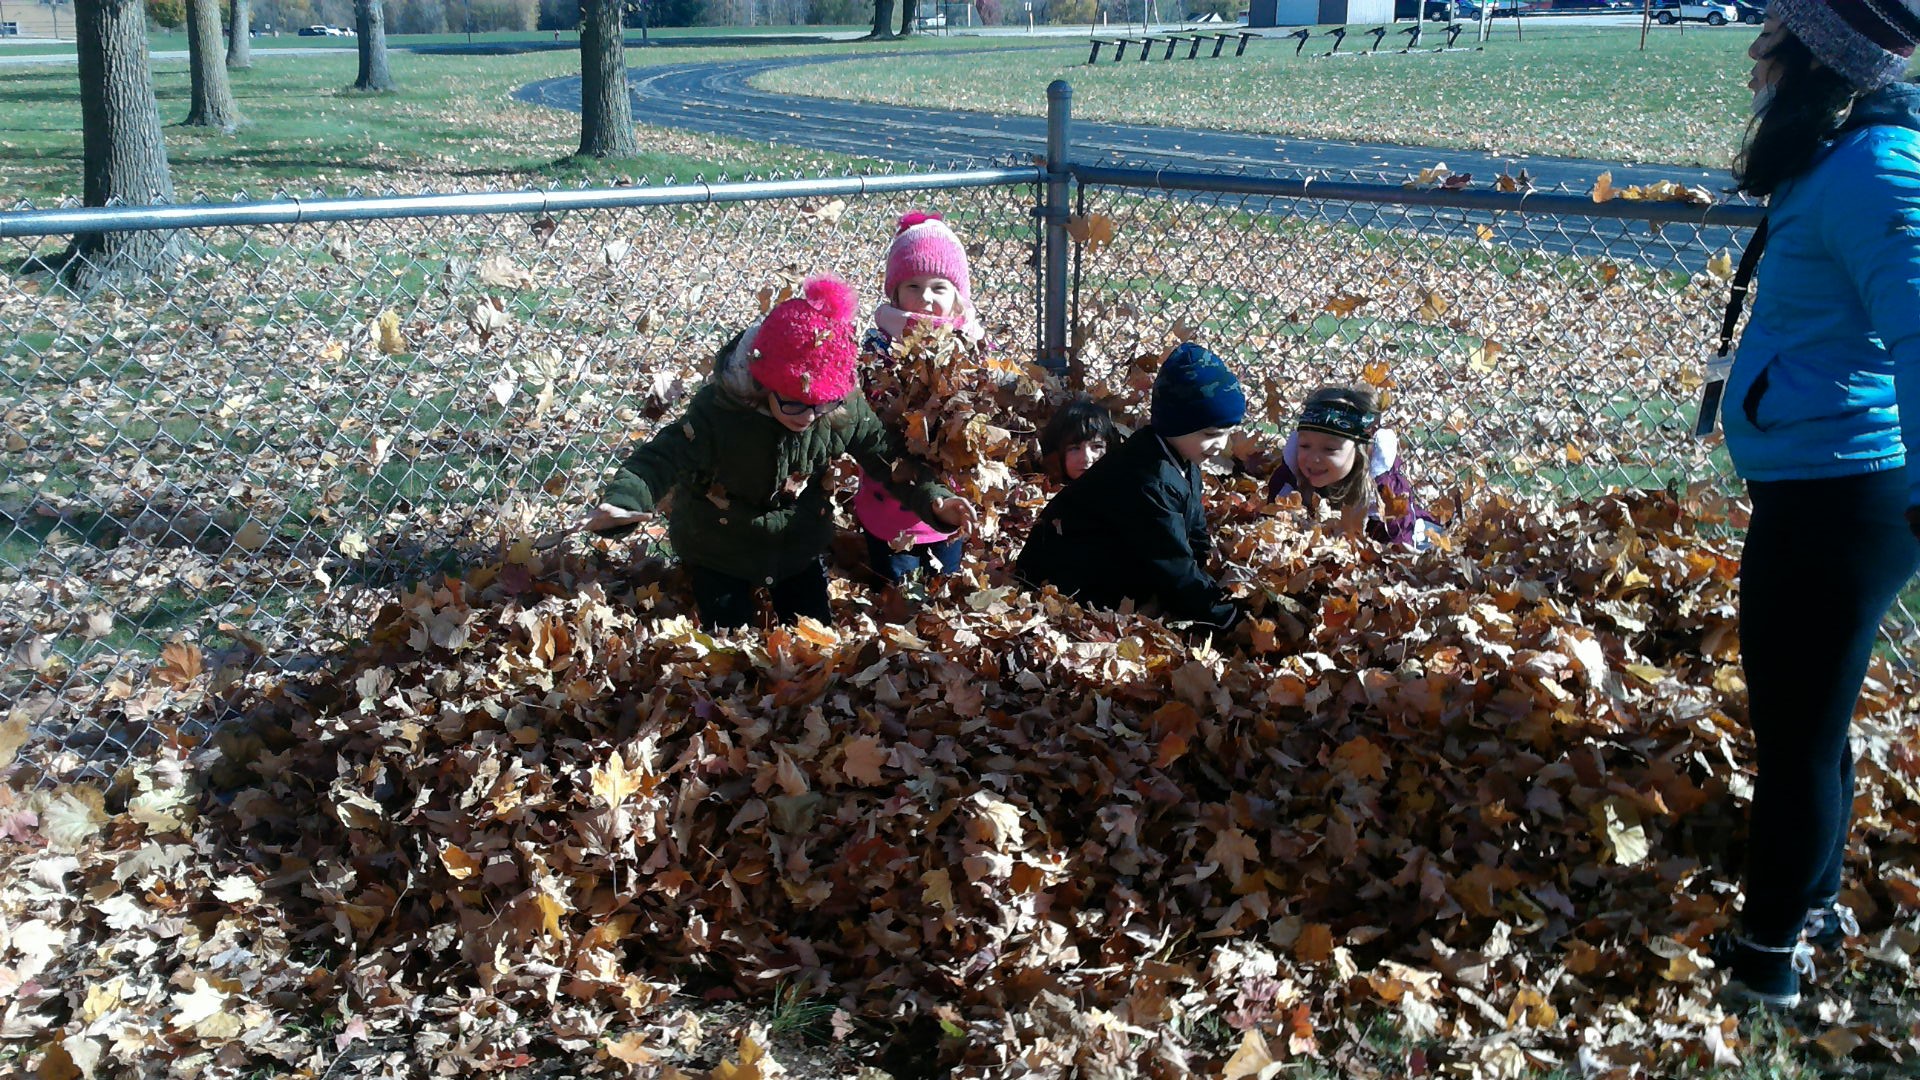 STUDENTS PLAYING WITH THE LEAVES.